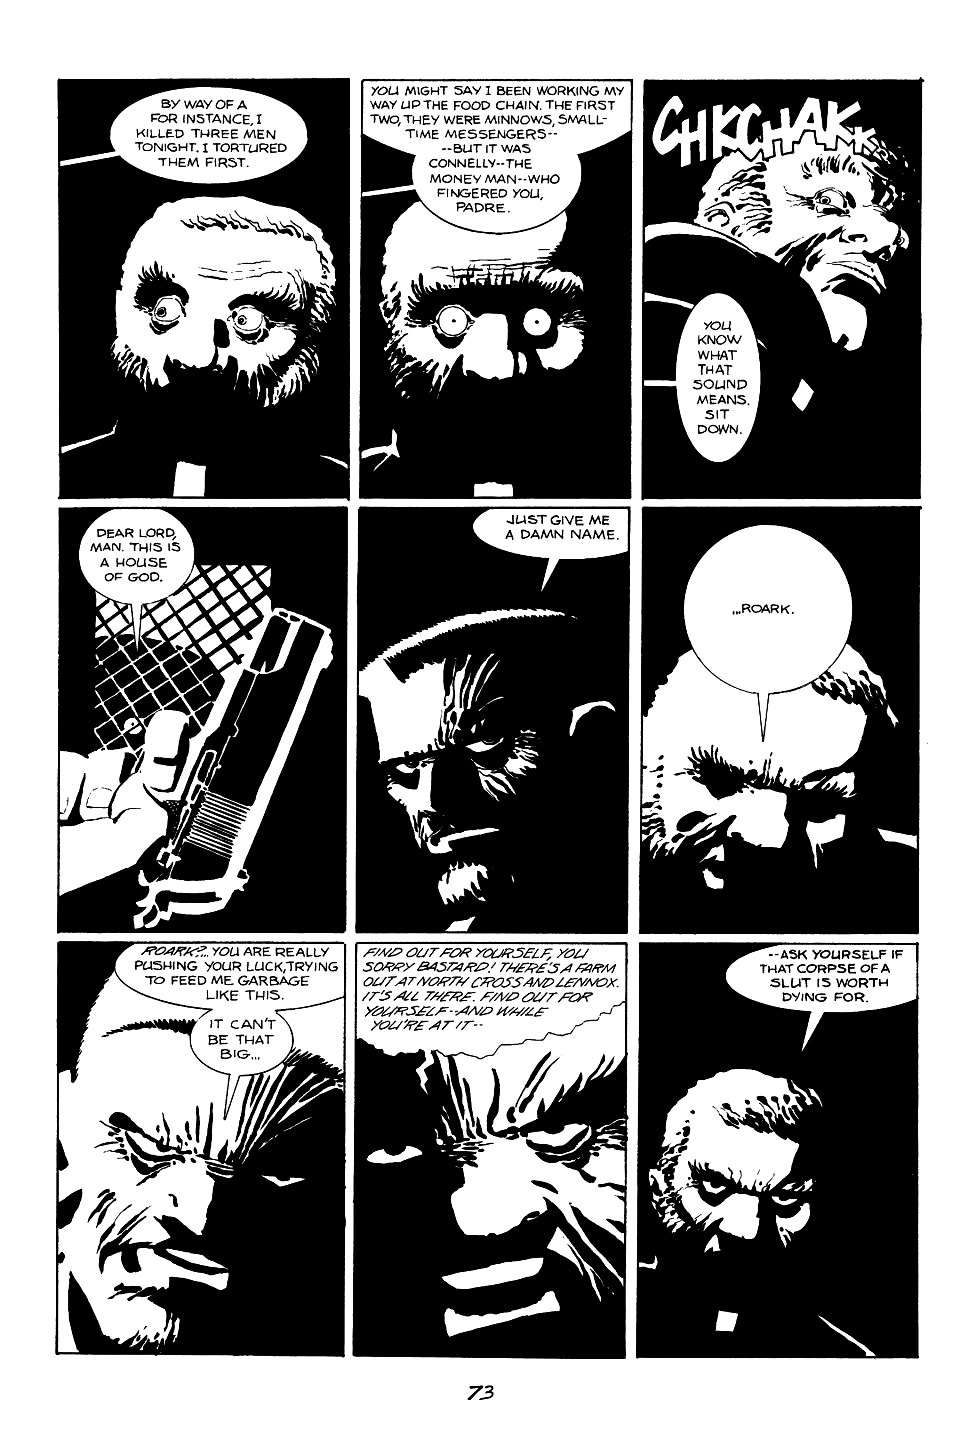 page 73 of sin city 1 the hard goodbye